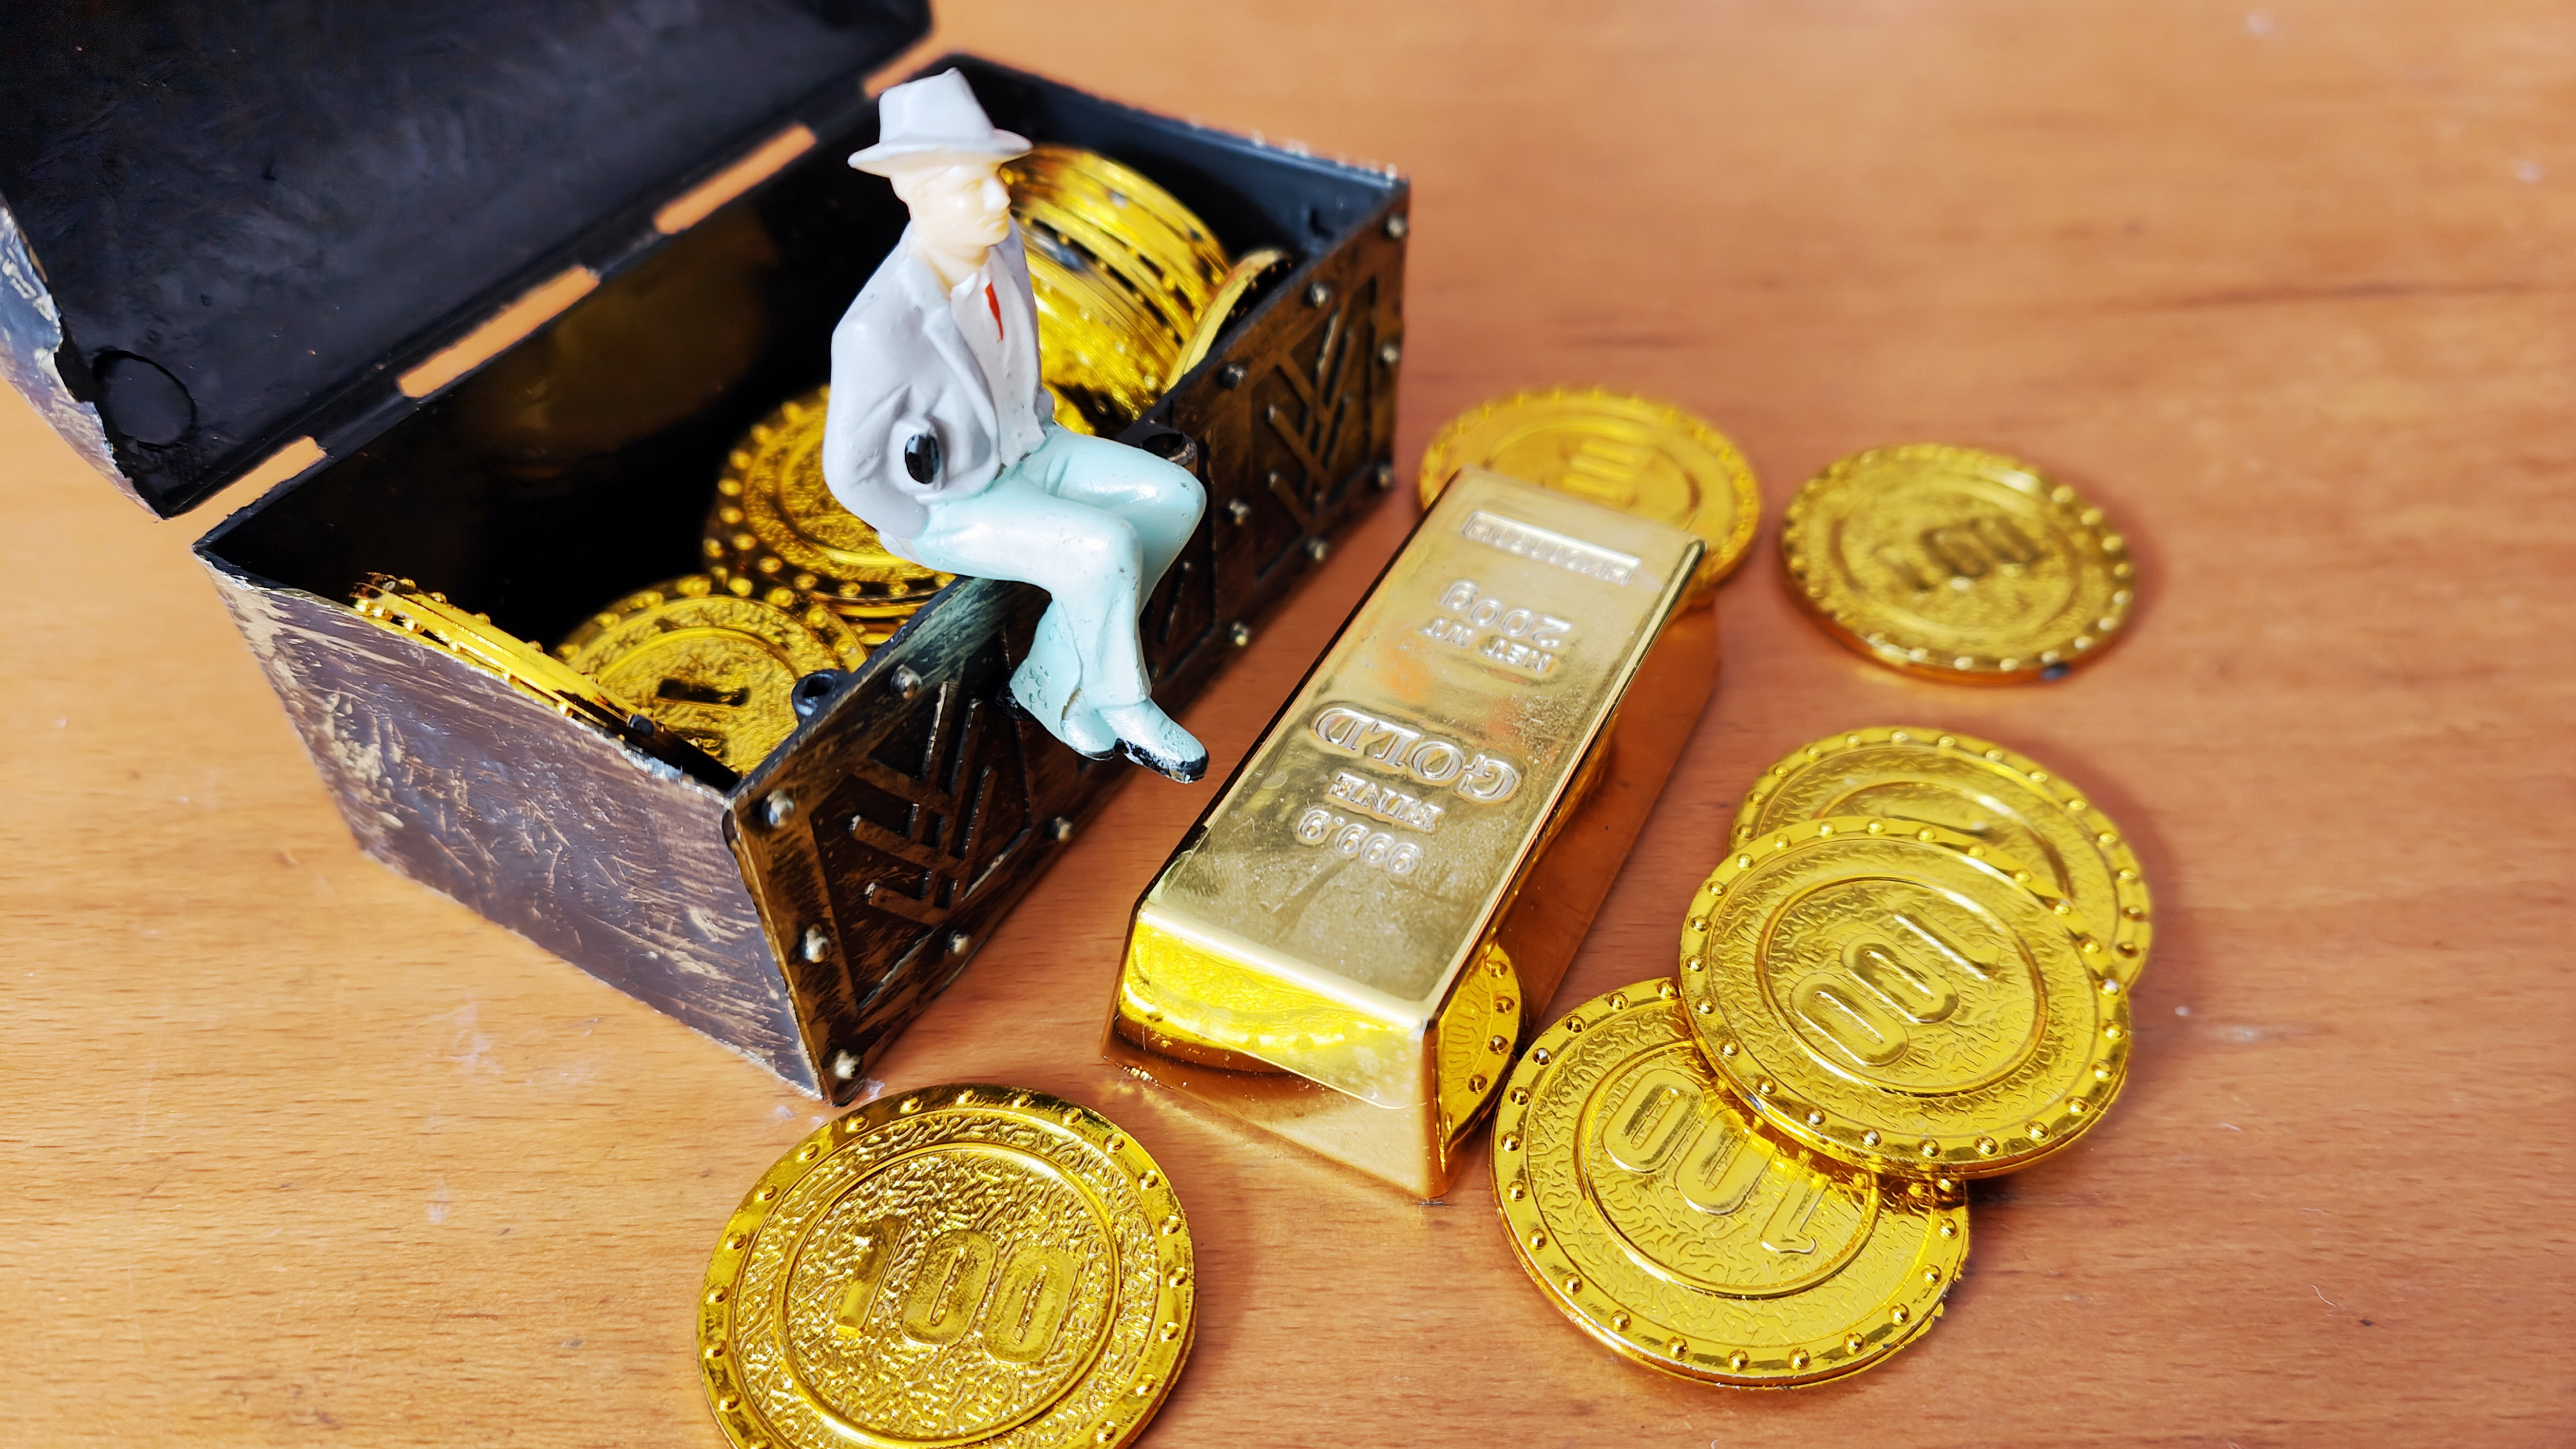 Some banks in China have raised investment thresholds for gold savings accounts to warn investors amid a gold rally. Photo: VCG